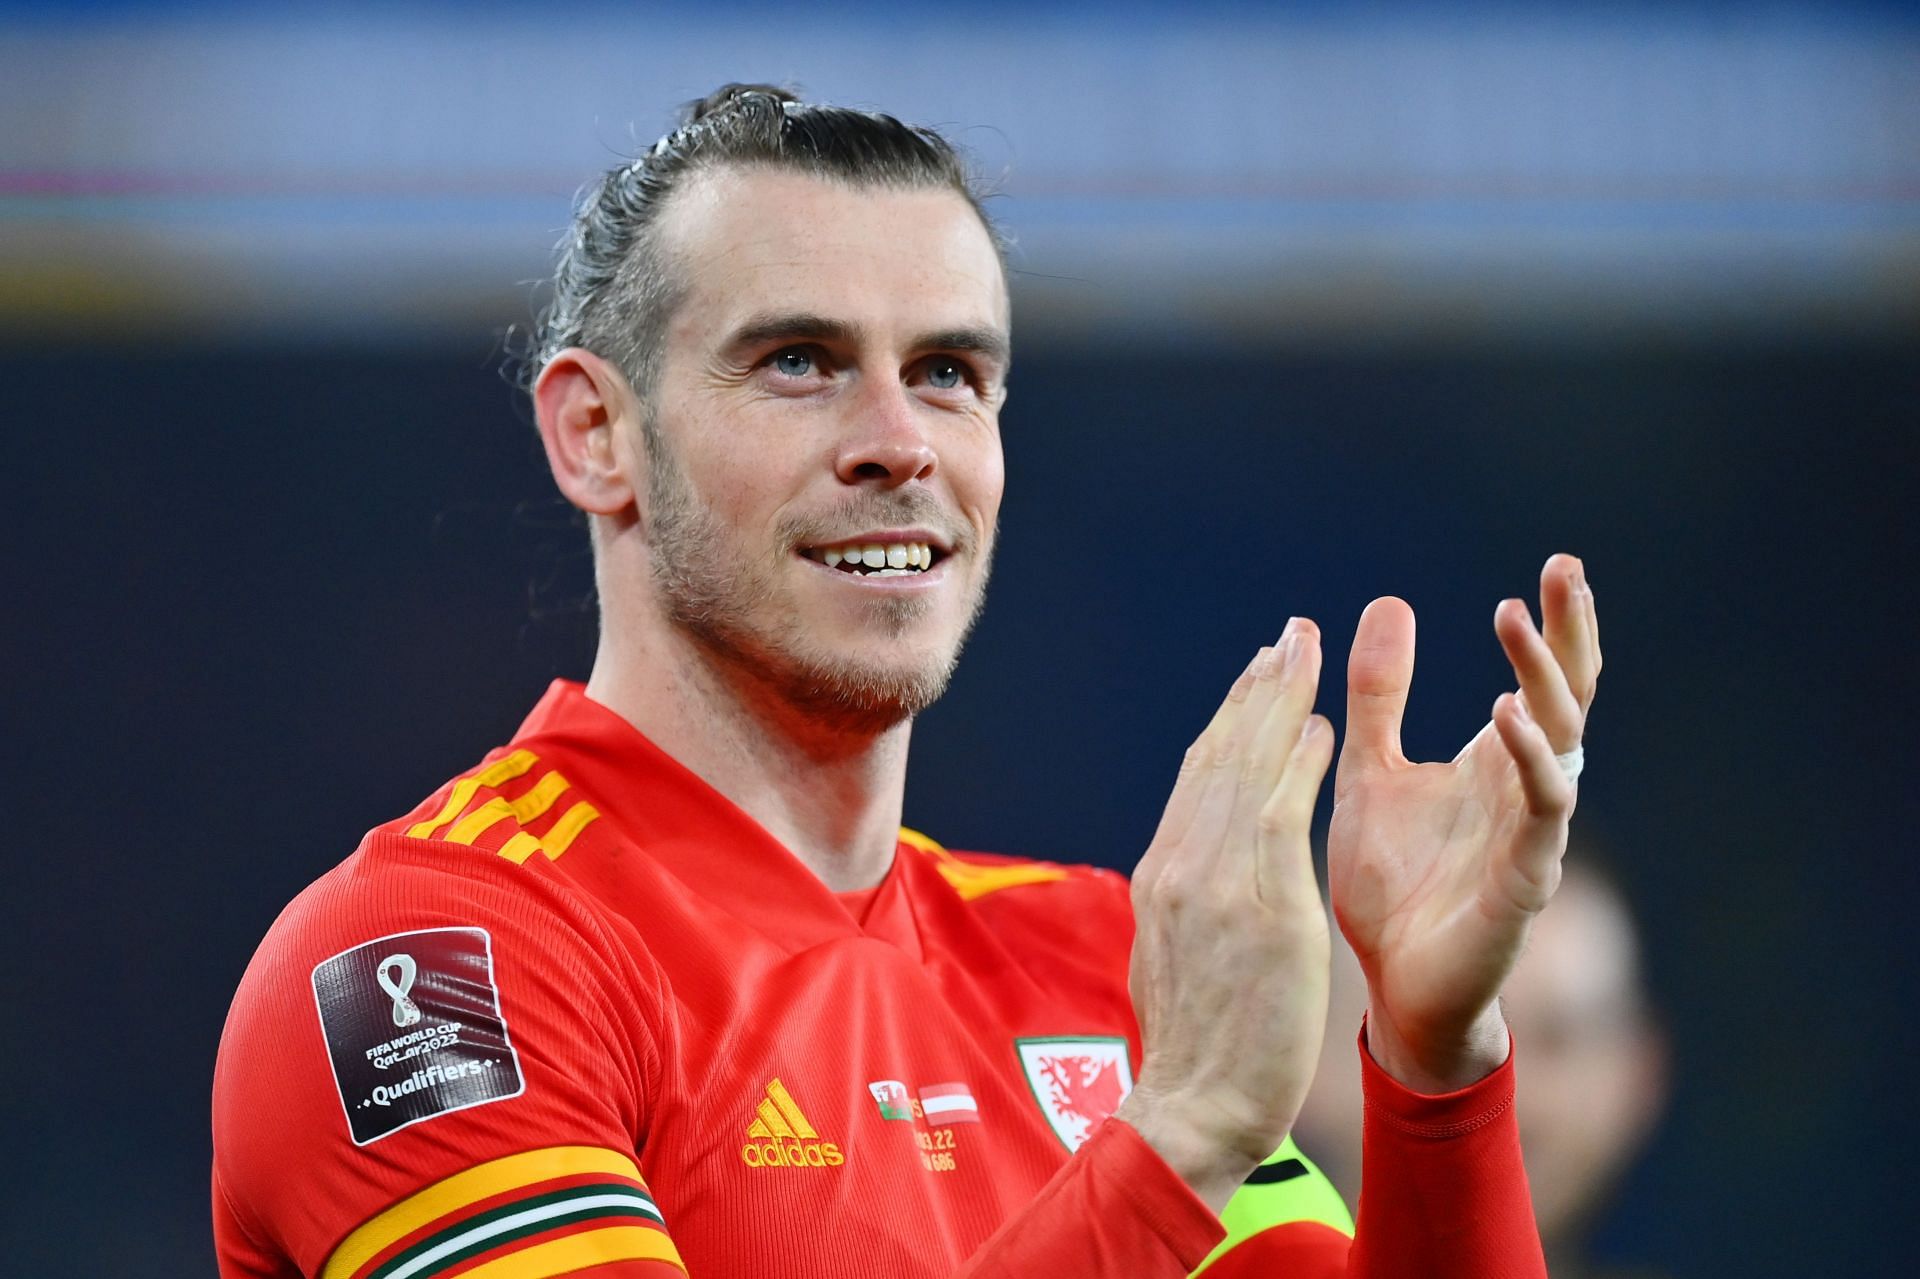 Gareth Bale is the captain and leader of Wales